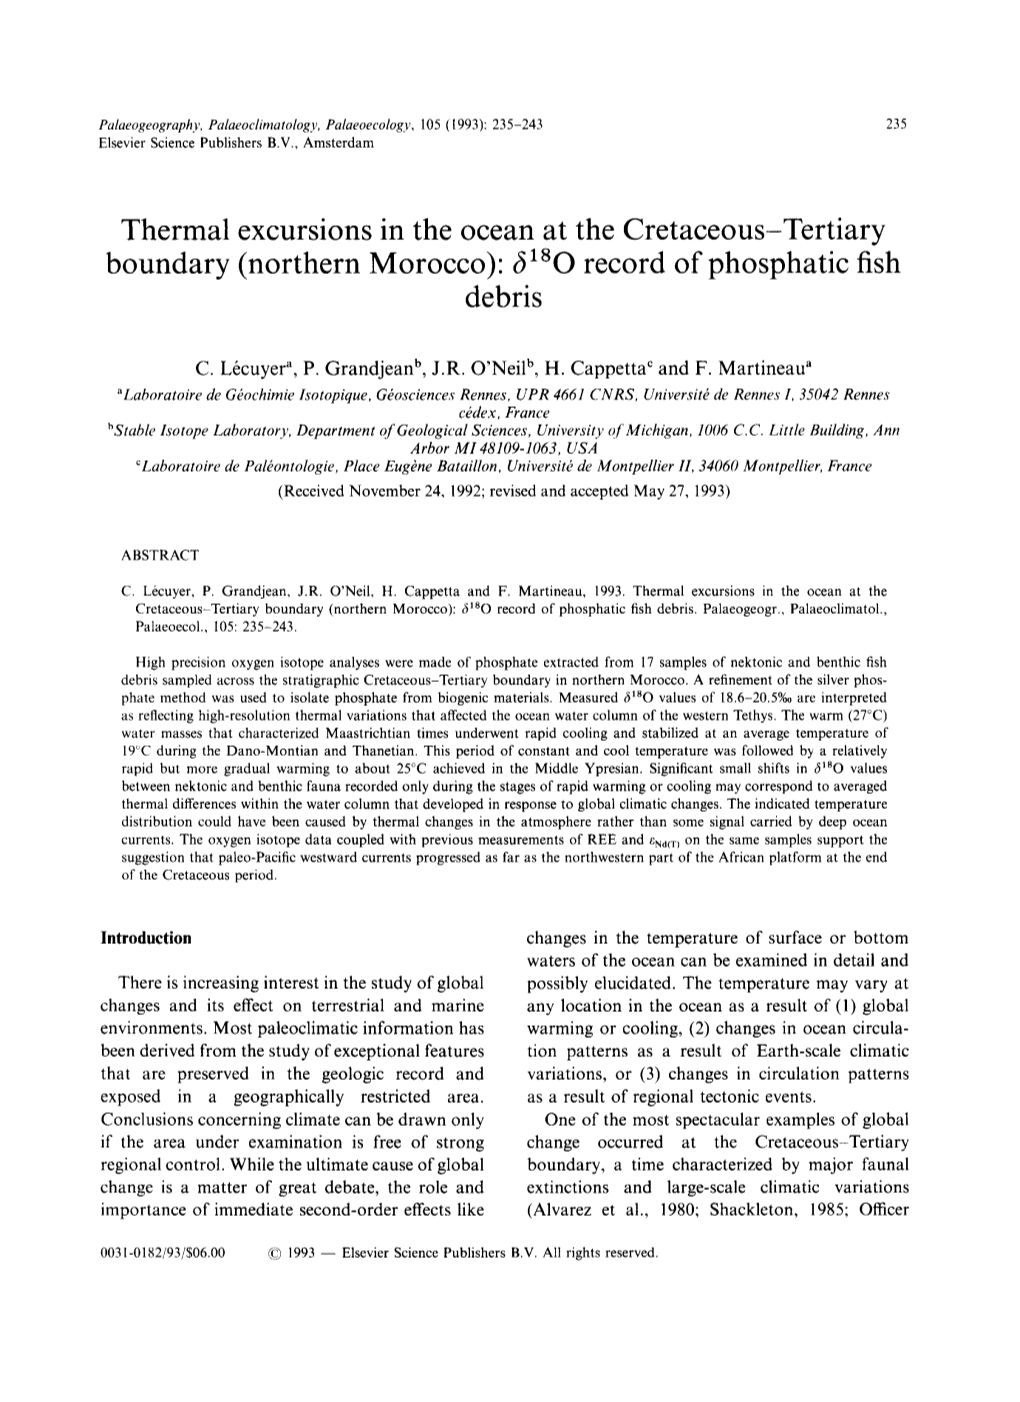 Thermal Excursions in the Ocean at the Cretaceous-Tertiary Boundary (Northern Morocco): 6 So Record of Phosphatic Fish Debris